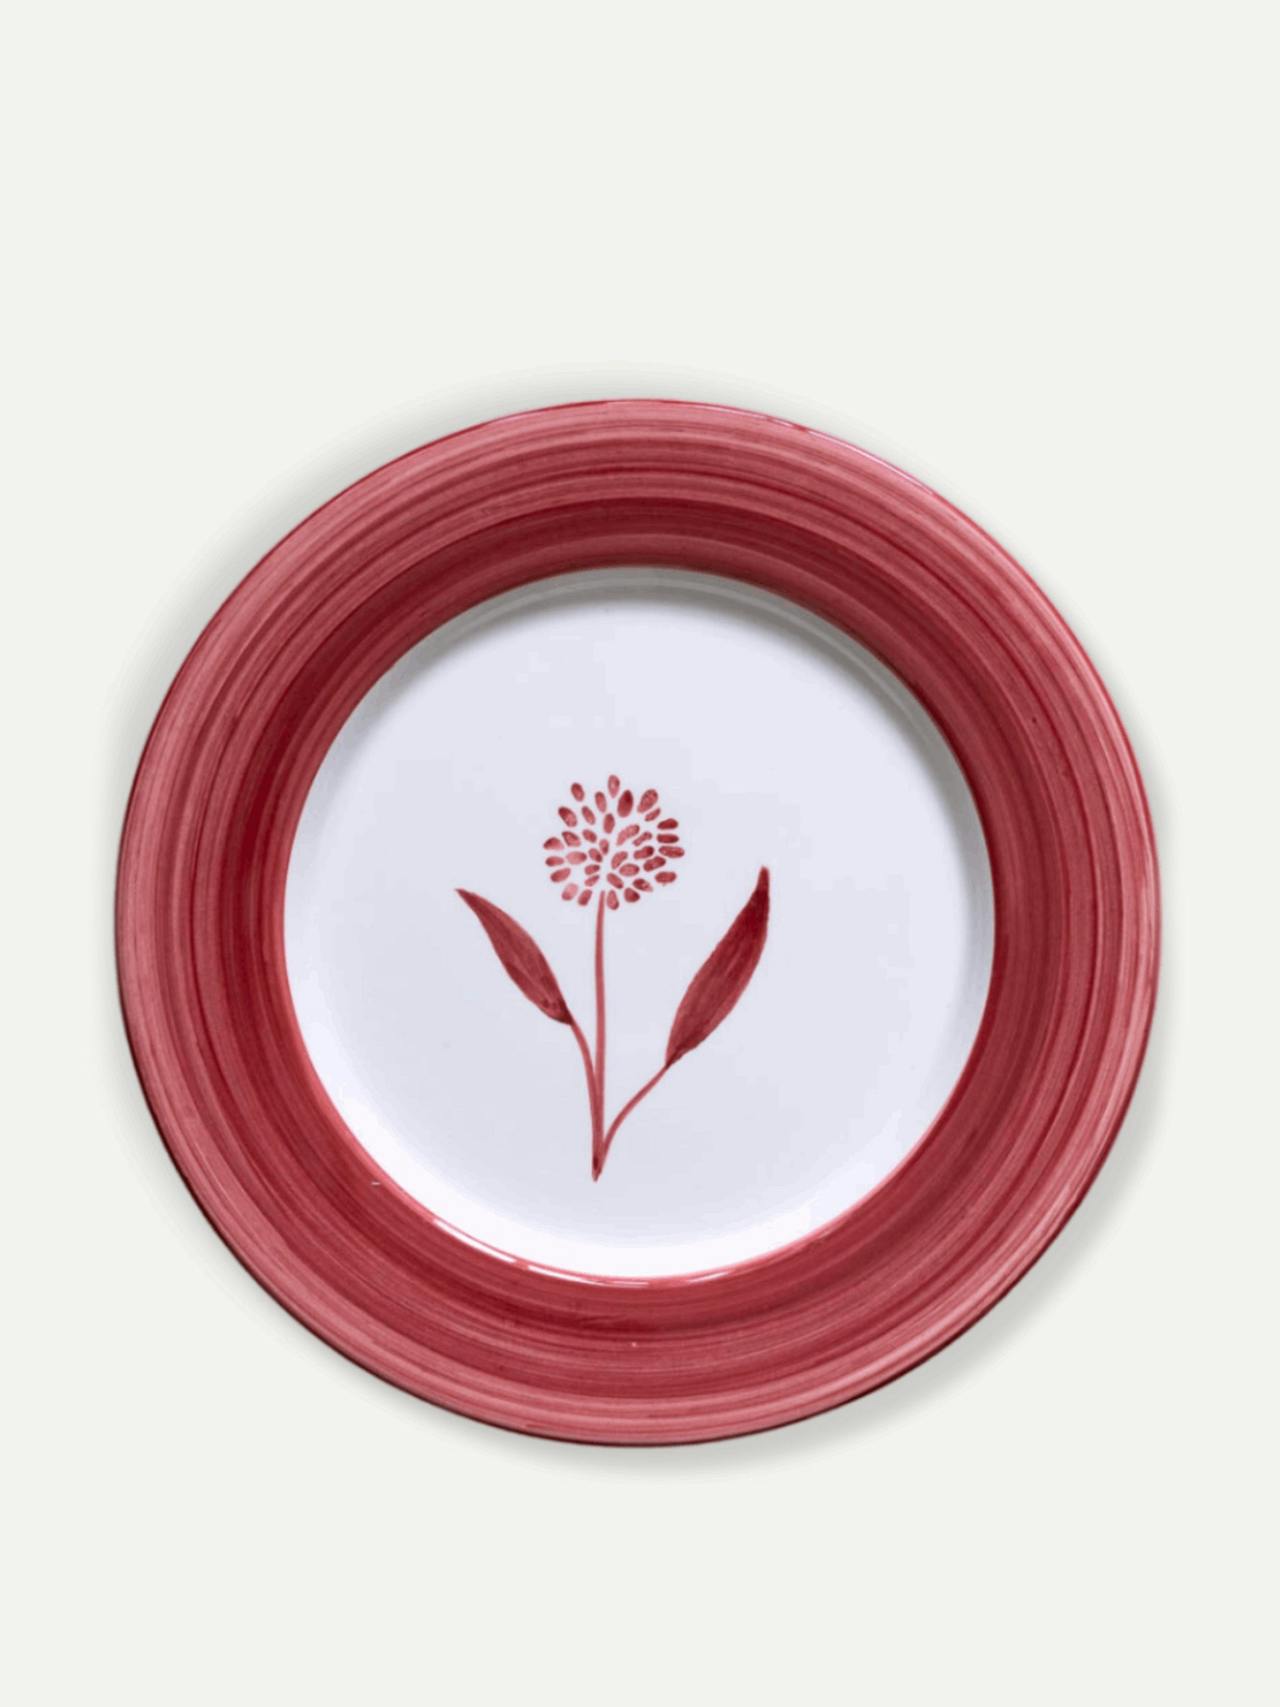 Cecilia hand-painted ceramic dinner plate